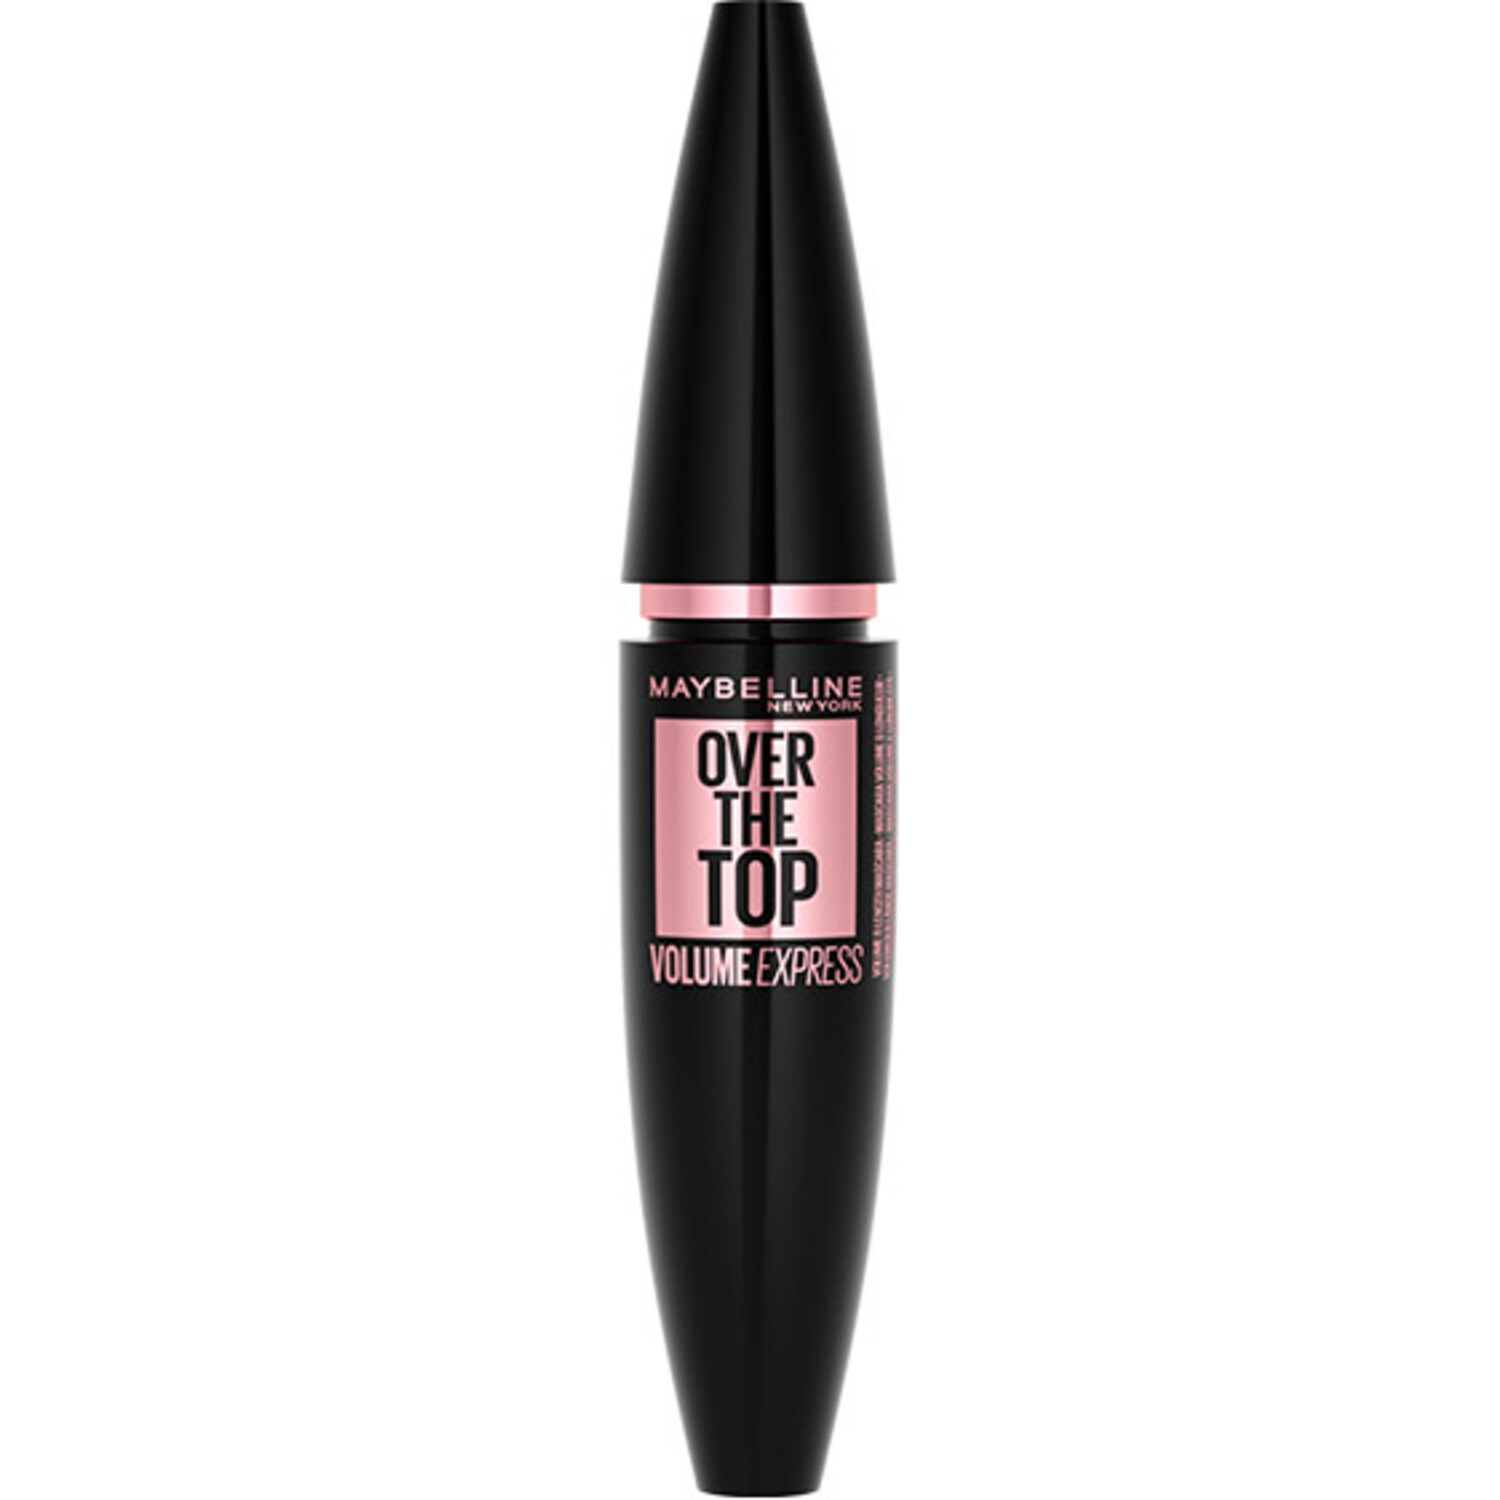 Maybelline Over The Top Volume Express Mascara - Black Image 1